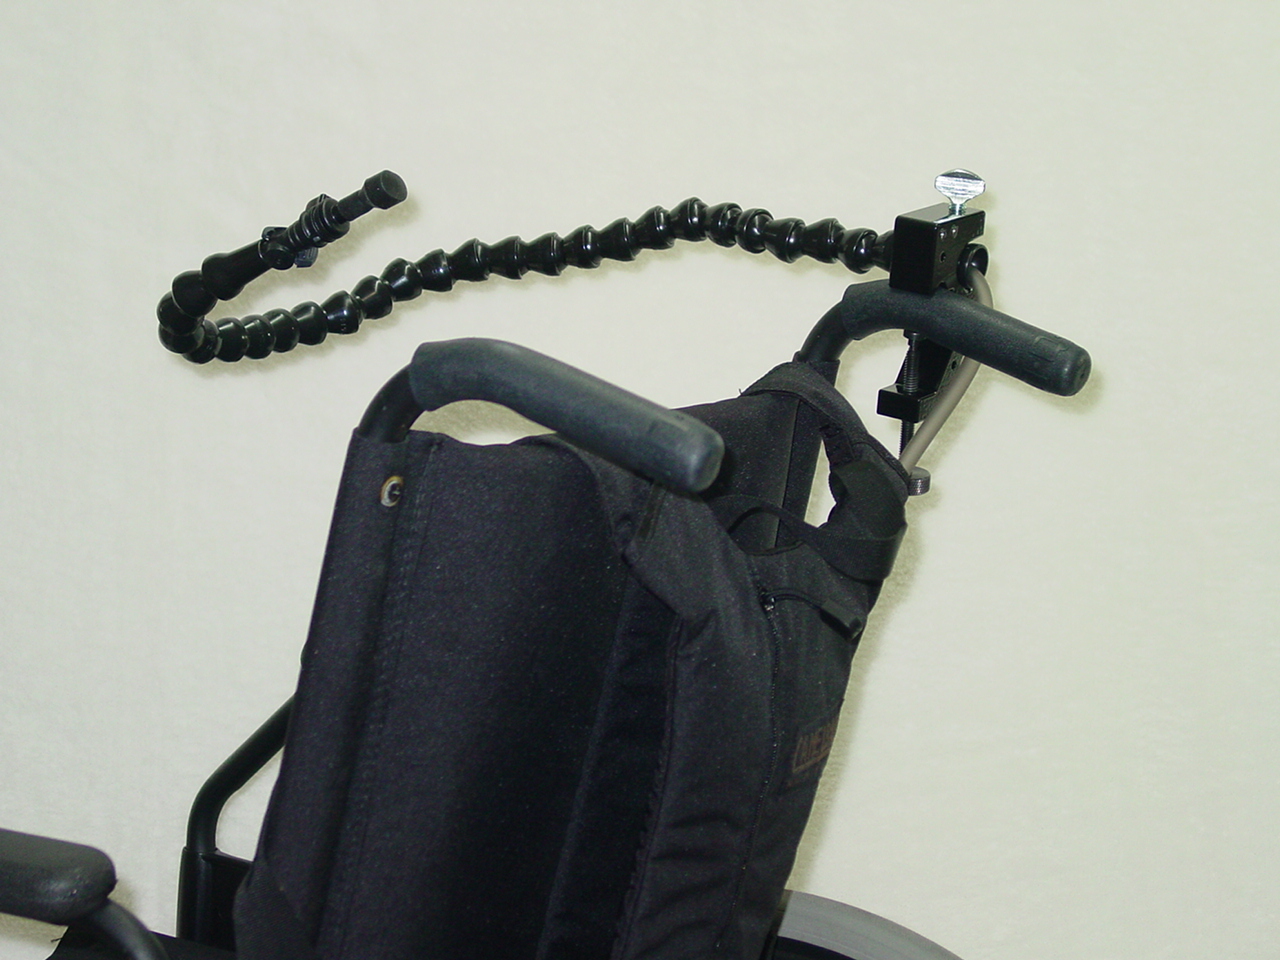 Hydration Backpack with Drinking Tube Positioning